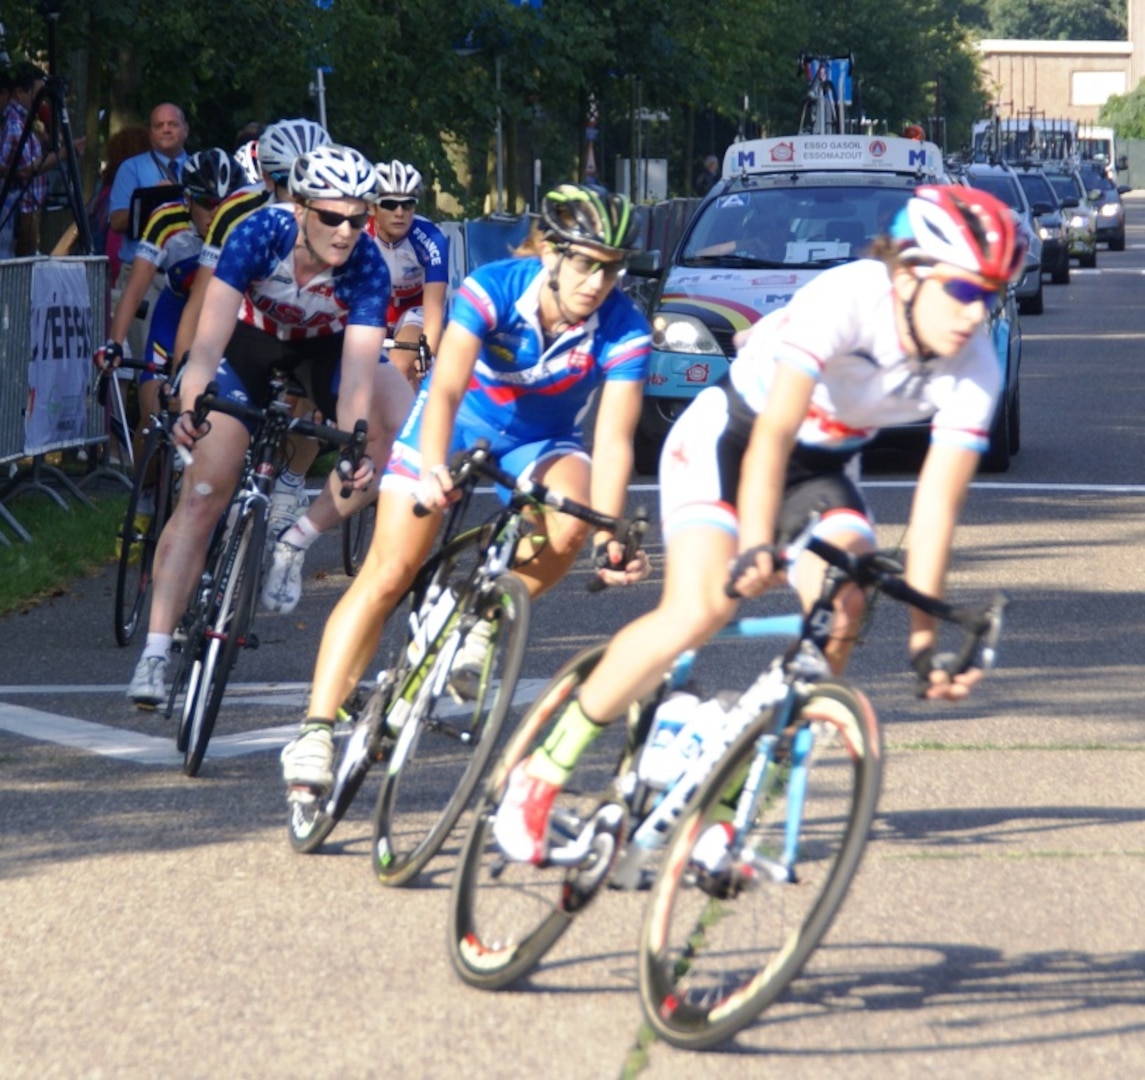 LCDR Katy Giles (Navy) - left - competes in the womens road race at the 2013 CISM World Military Cycling Championship 2-6 September in Leopoldsburg, Belgium.  